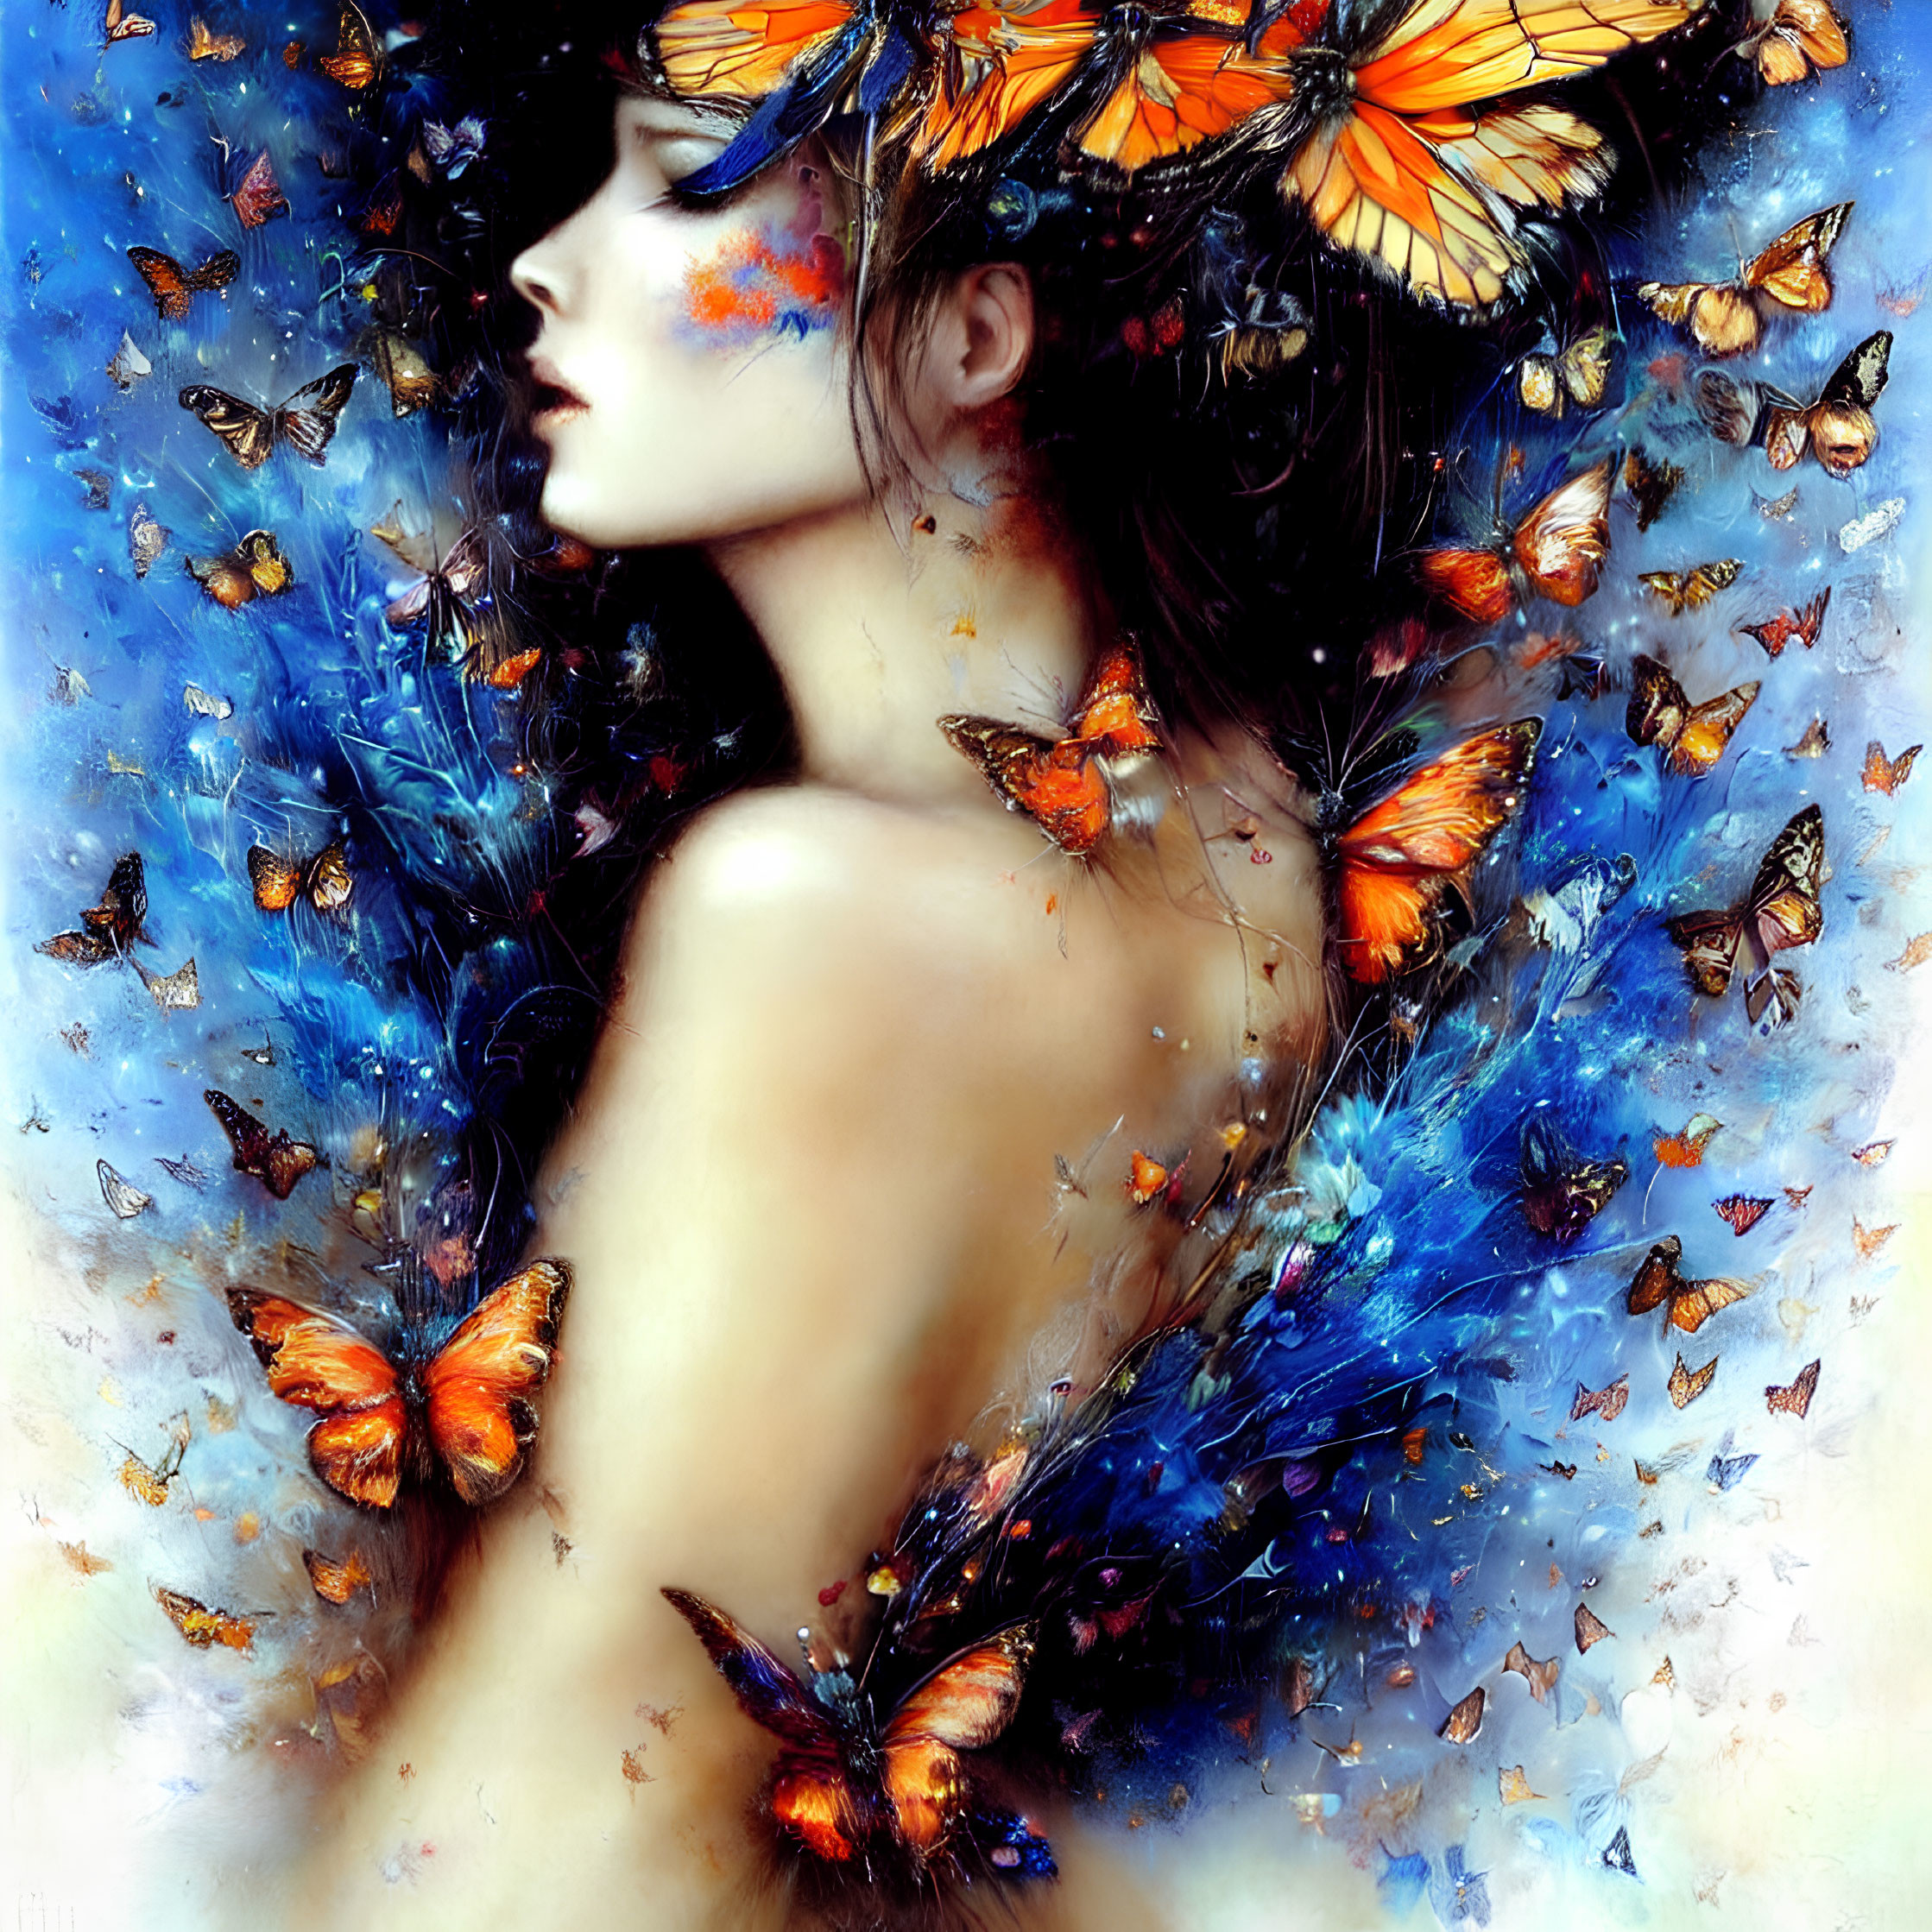 Profile of woman with butterflies, dreamy aesthetic